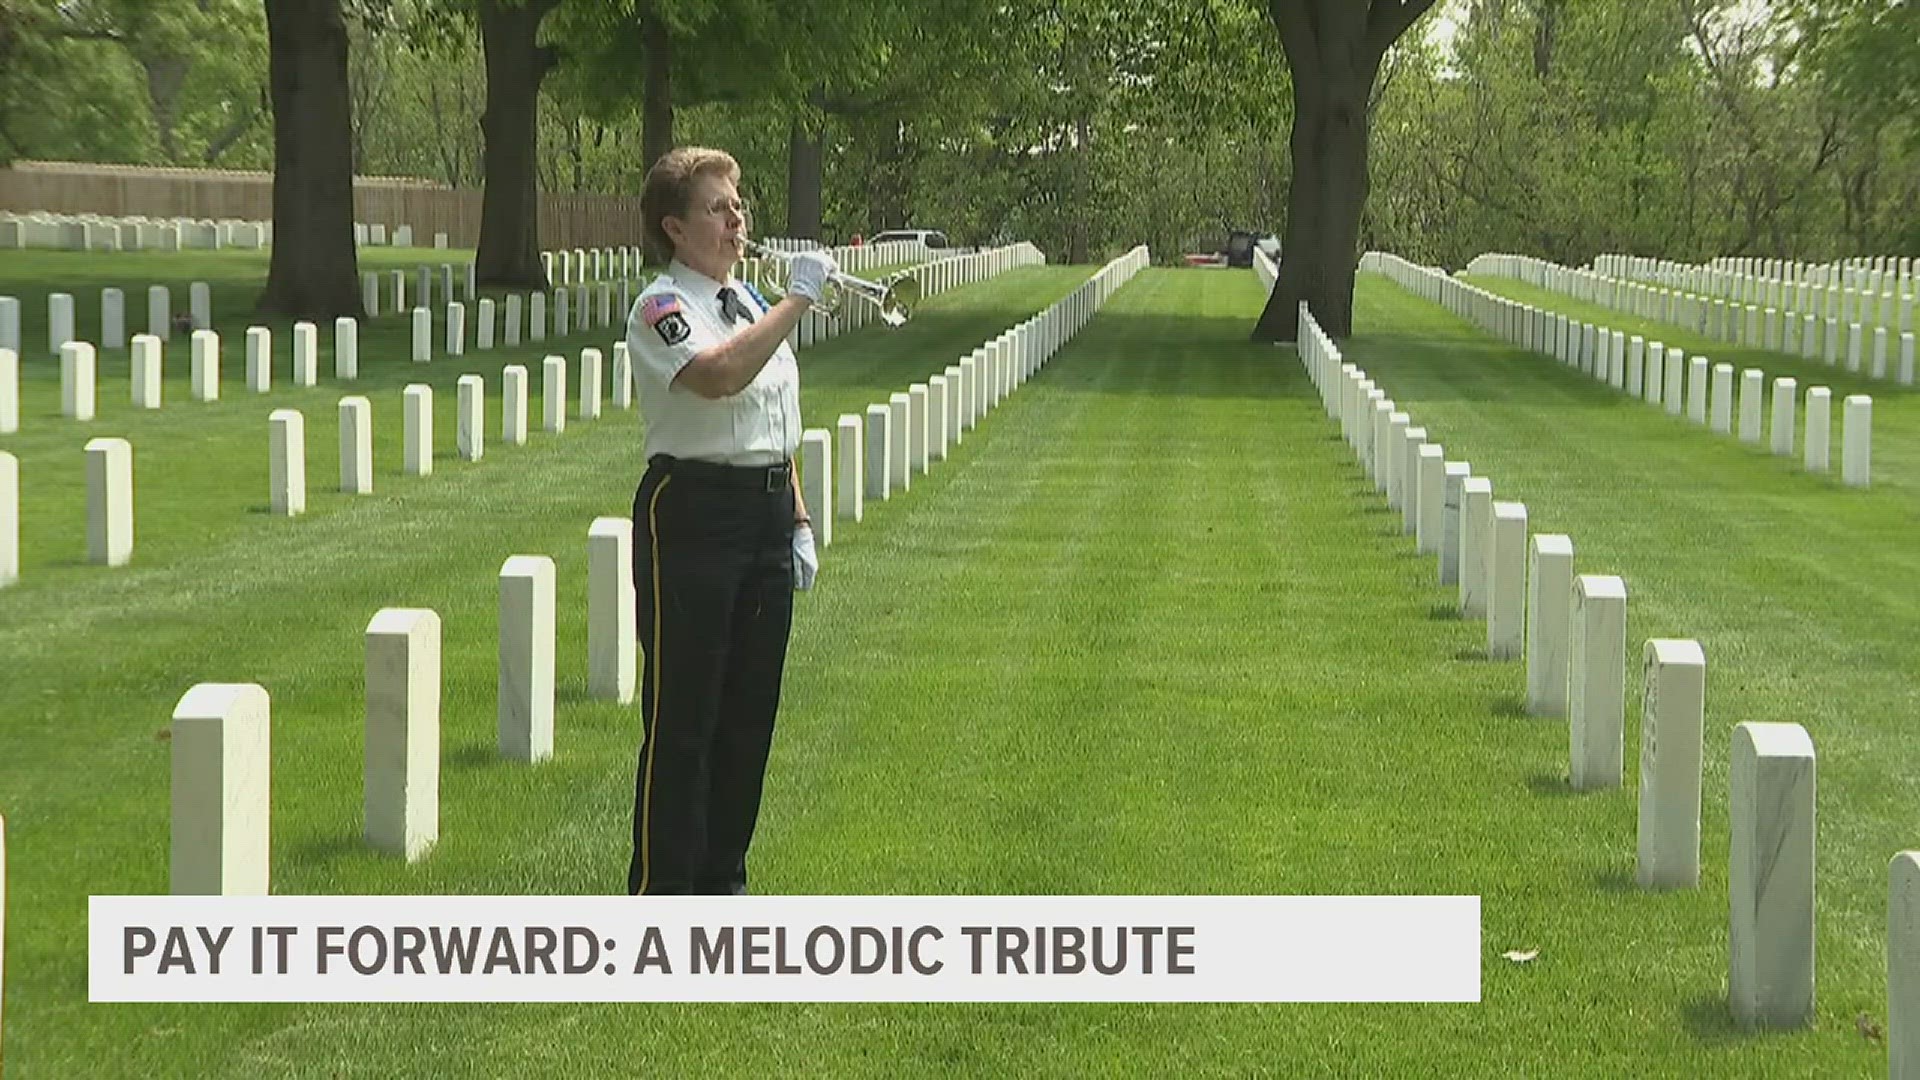 Tracy Hepner has played Taps on her bugle for thousands of military funerals for nearly two decades